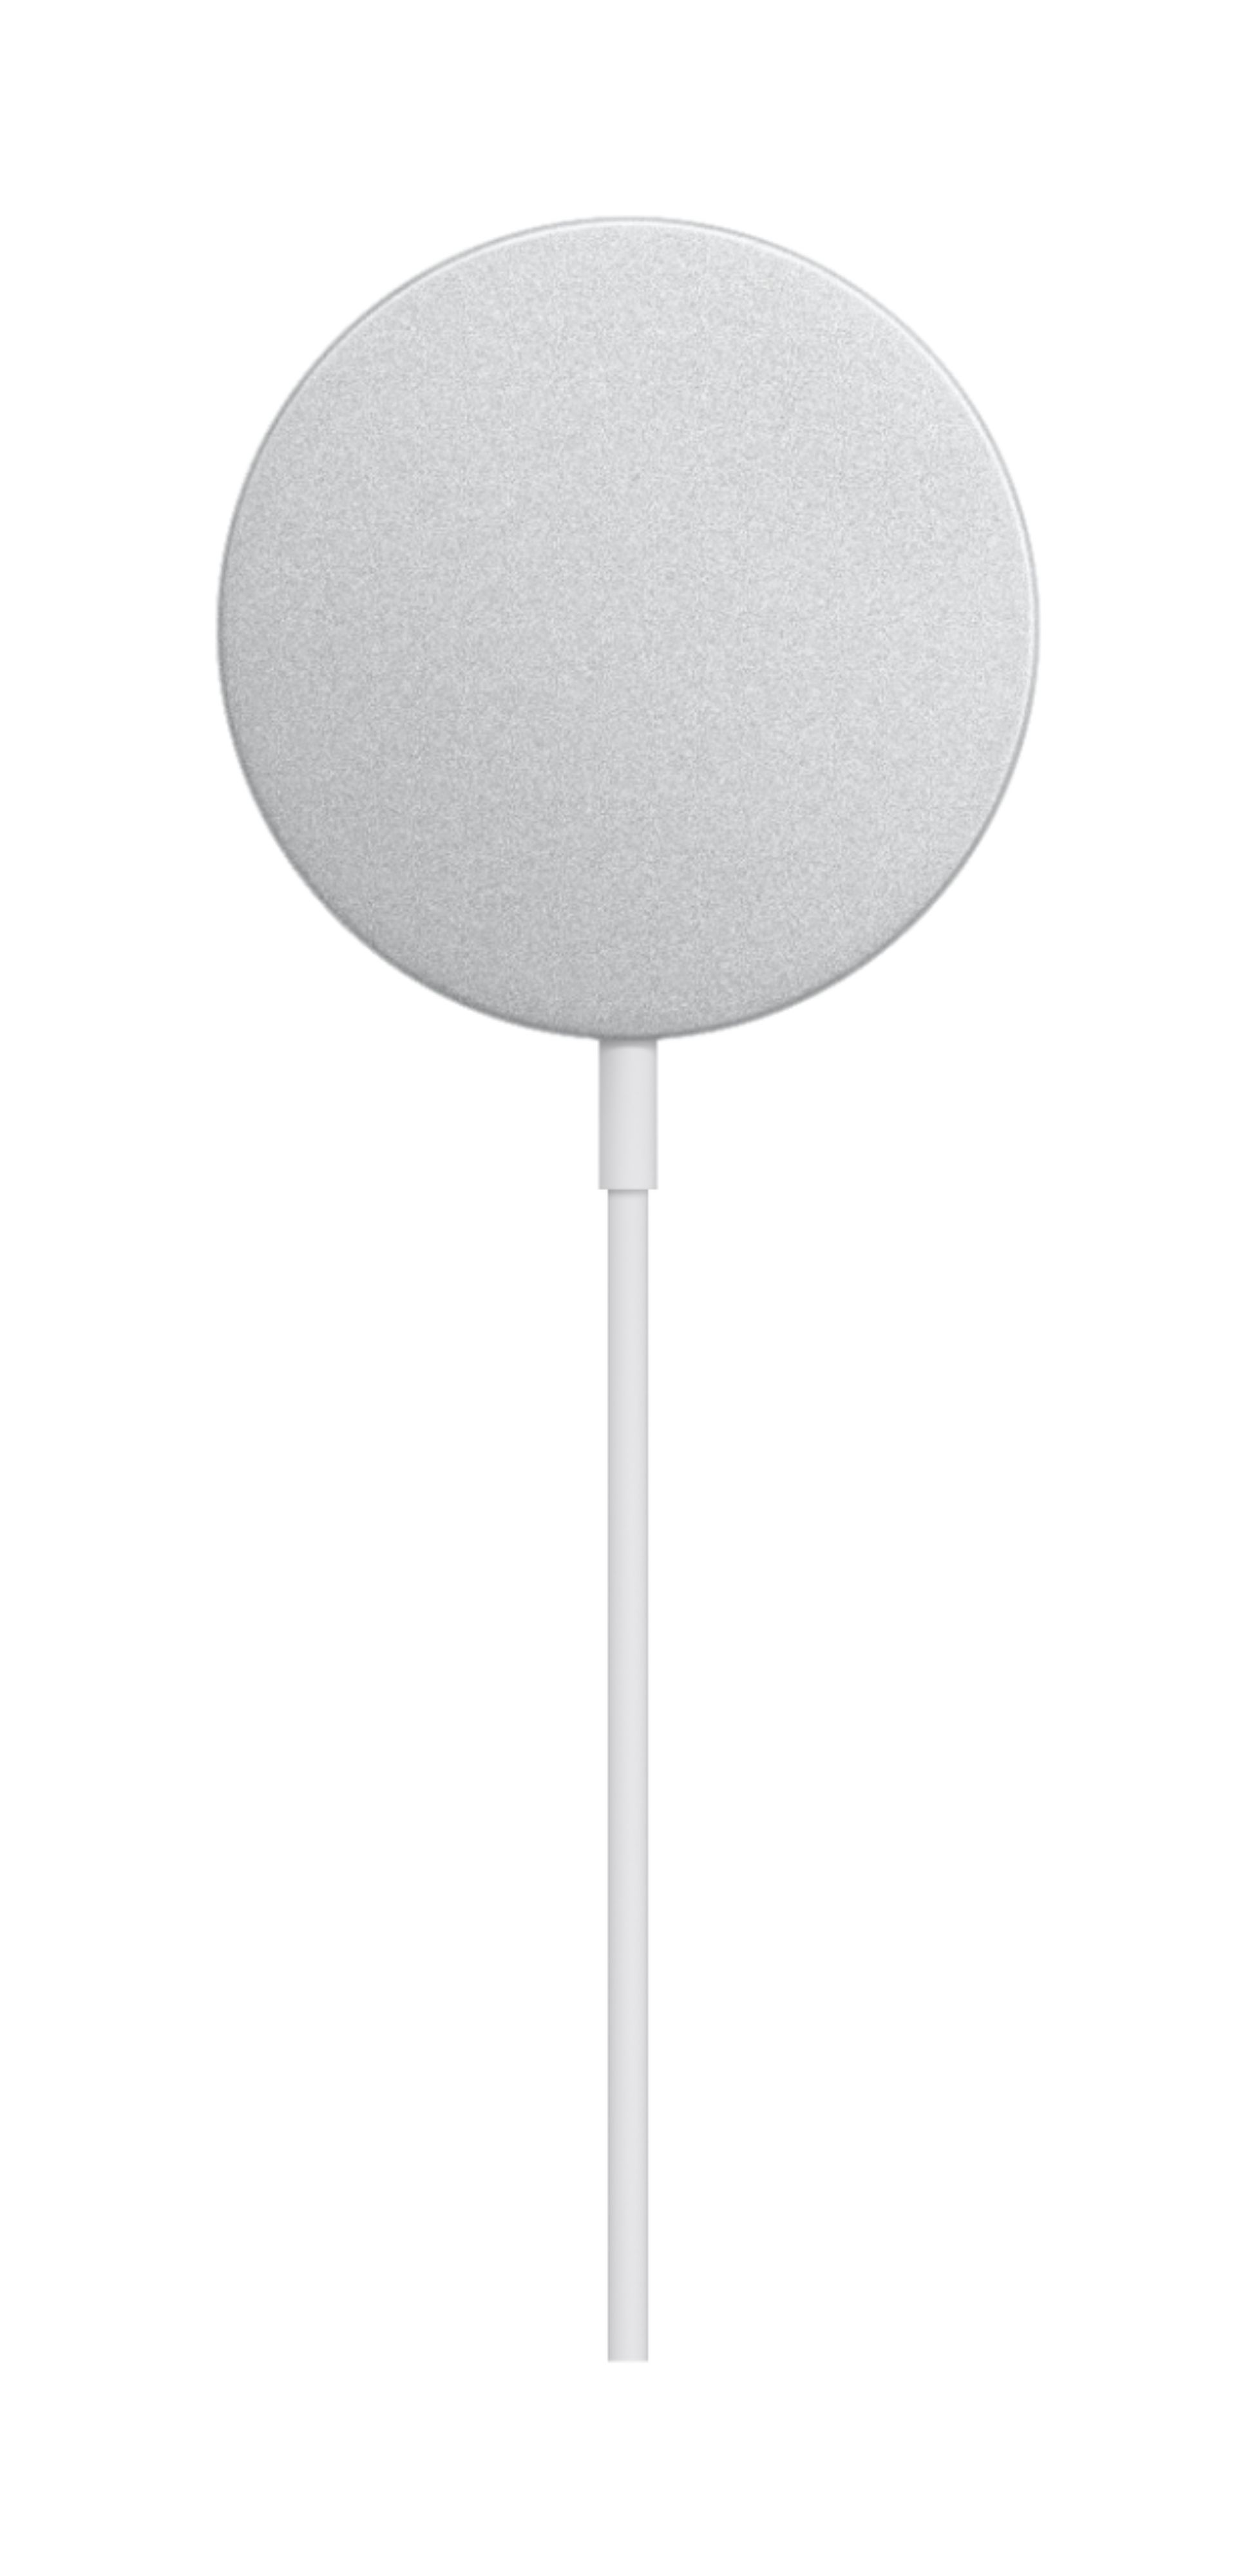 Apple - MagSafe iPhone Charger - White $29 Best Buy